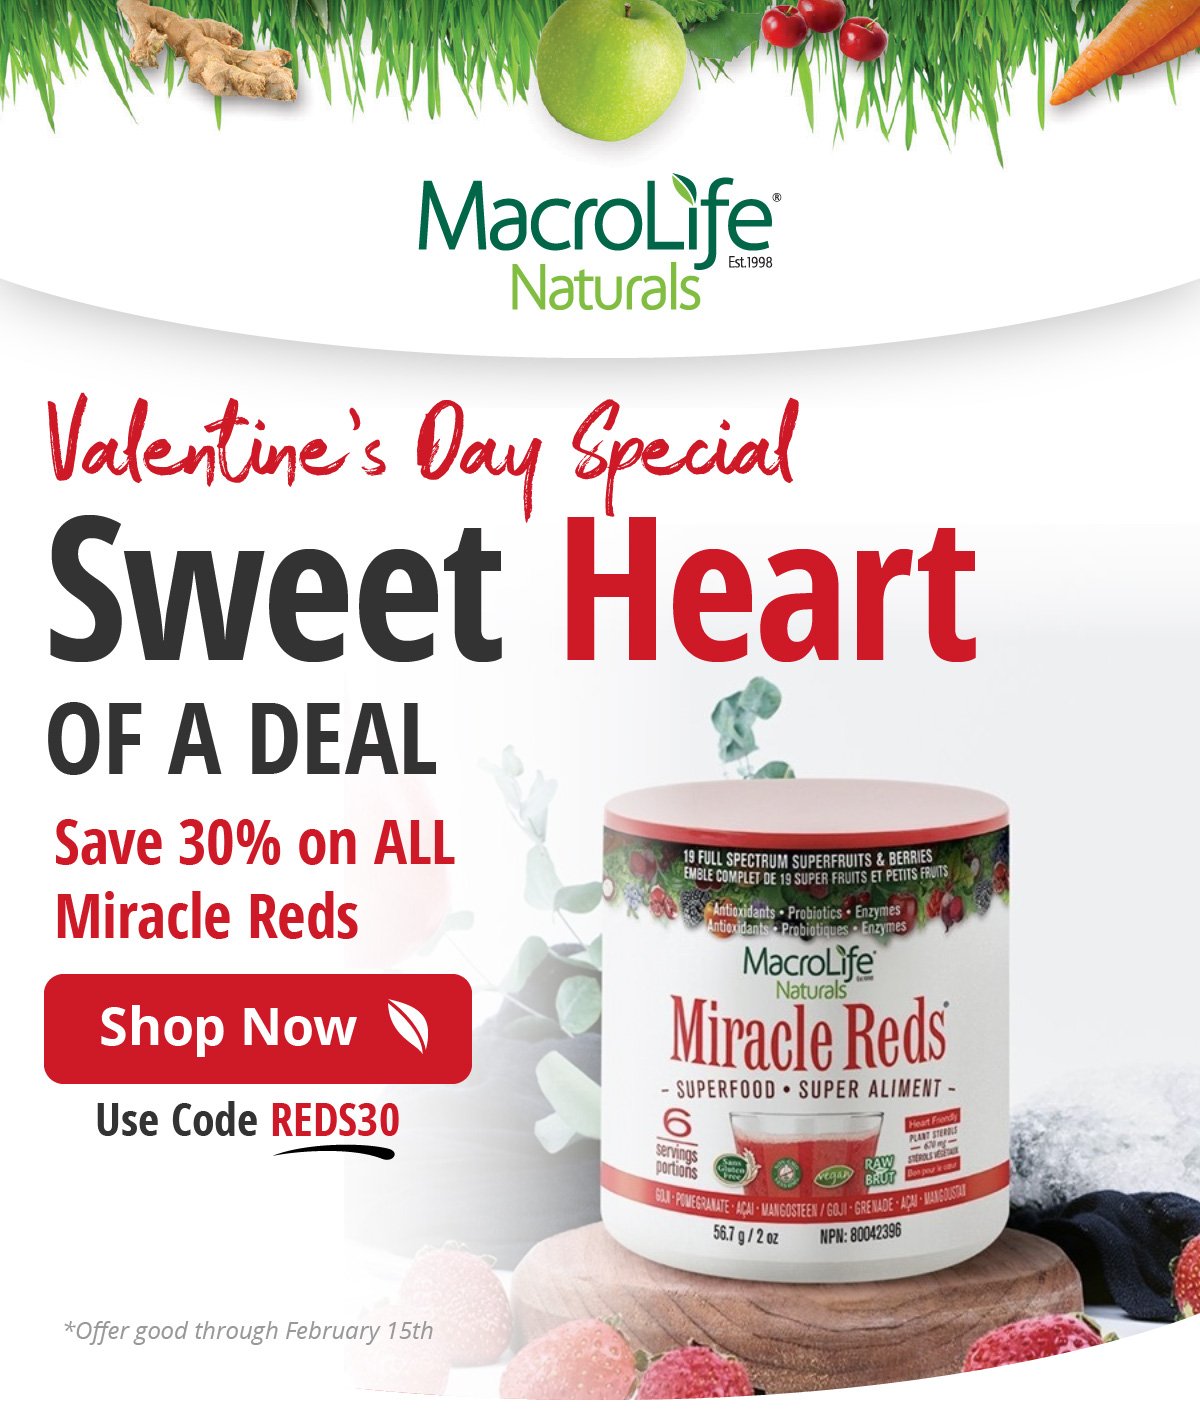 Valentine’s Day Special Sweet Heart OF A DEAL | Save 30% on ALL Miracle Reds | Shop Now | Use Code REDS30